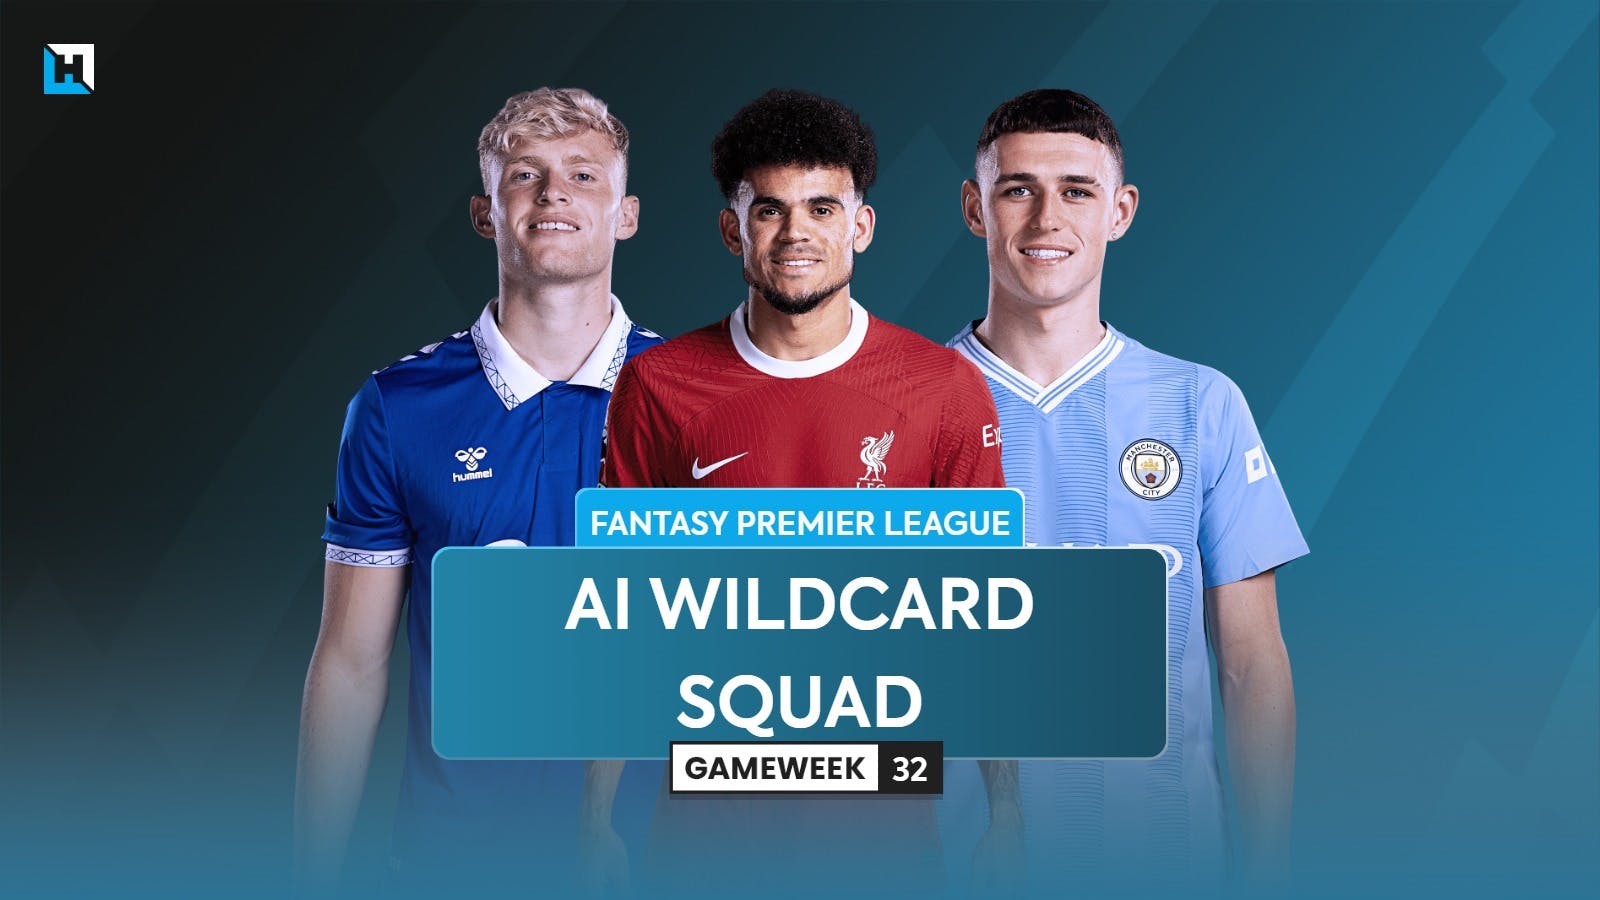 The best FPL Wildcard team for Gameweek 32 according to AI